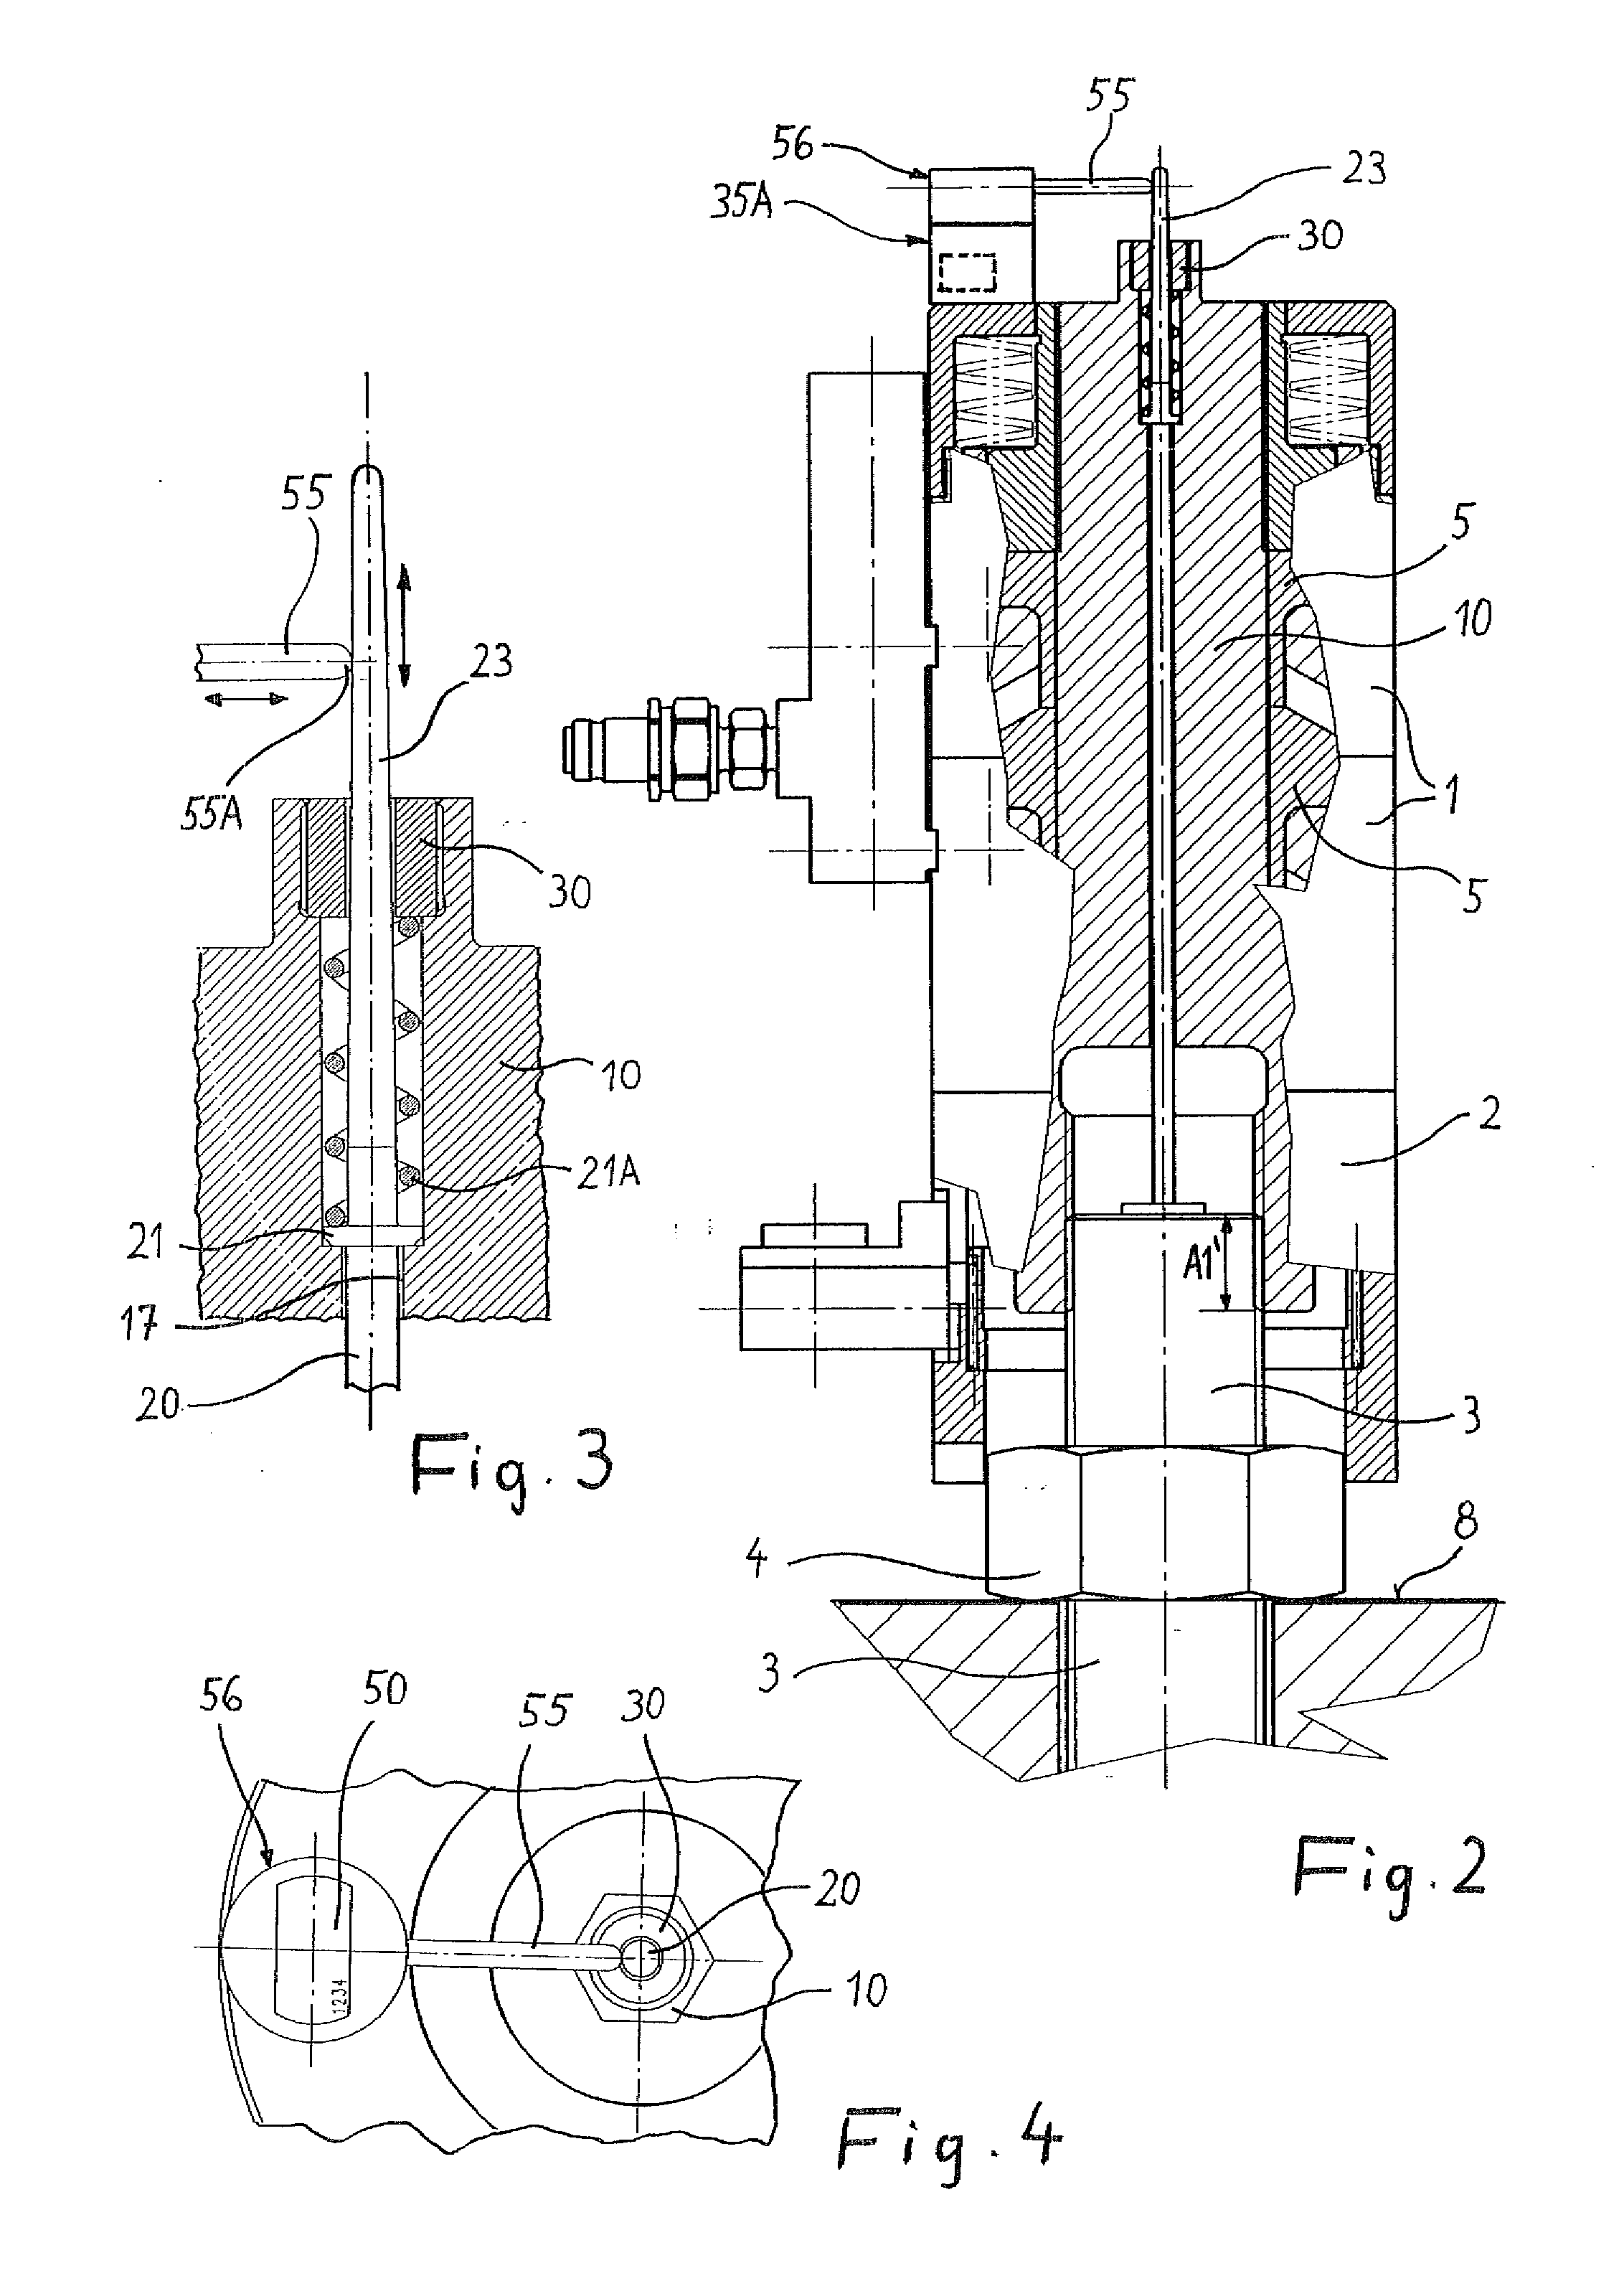 Tensioning device for extending a threaded bolt